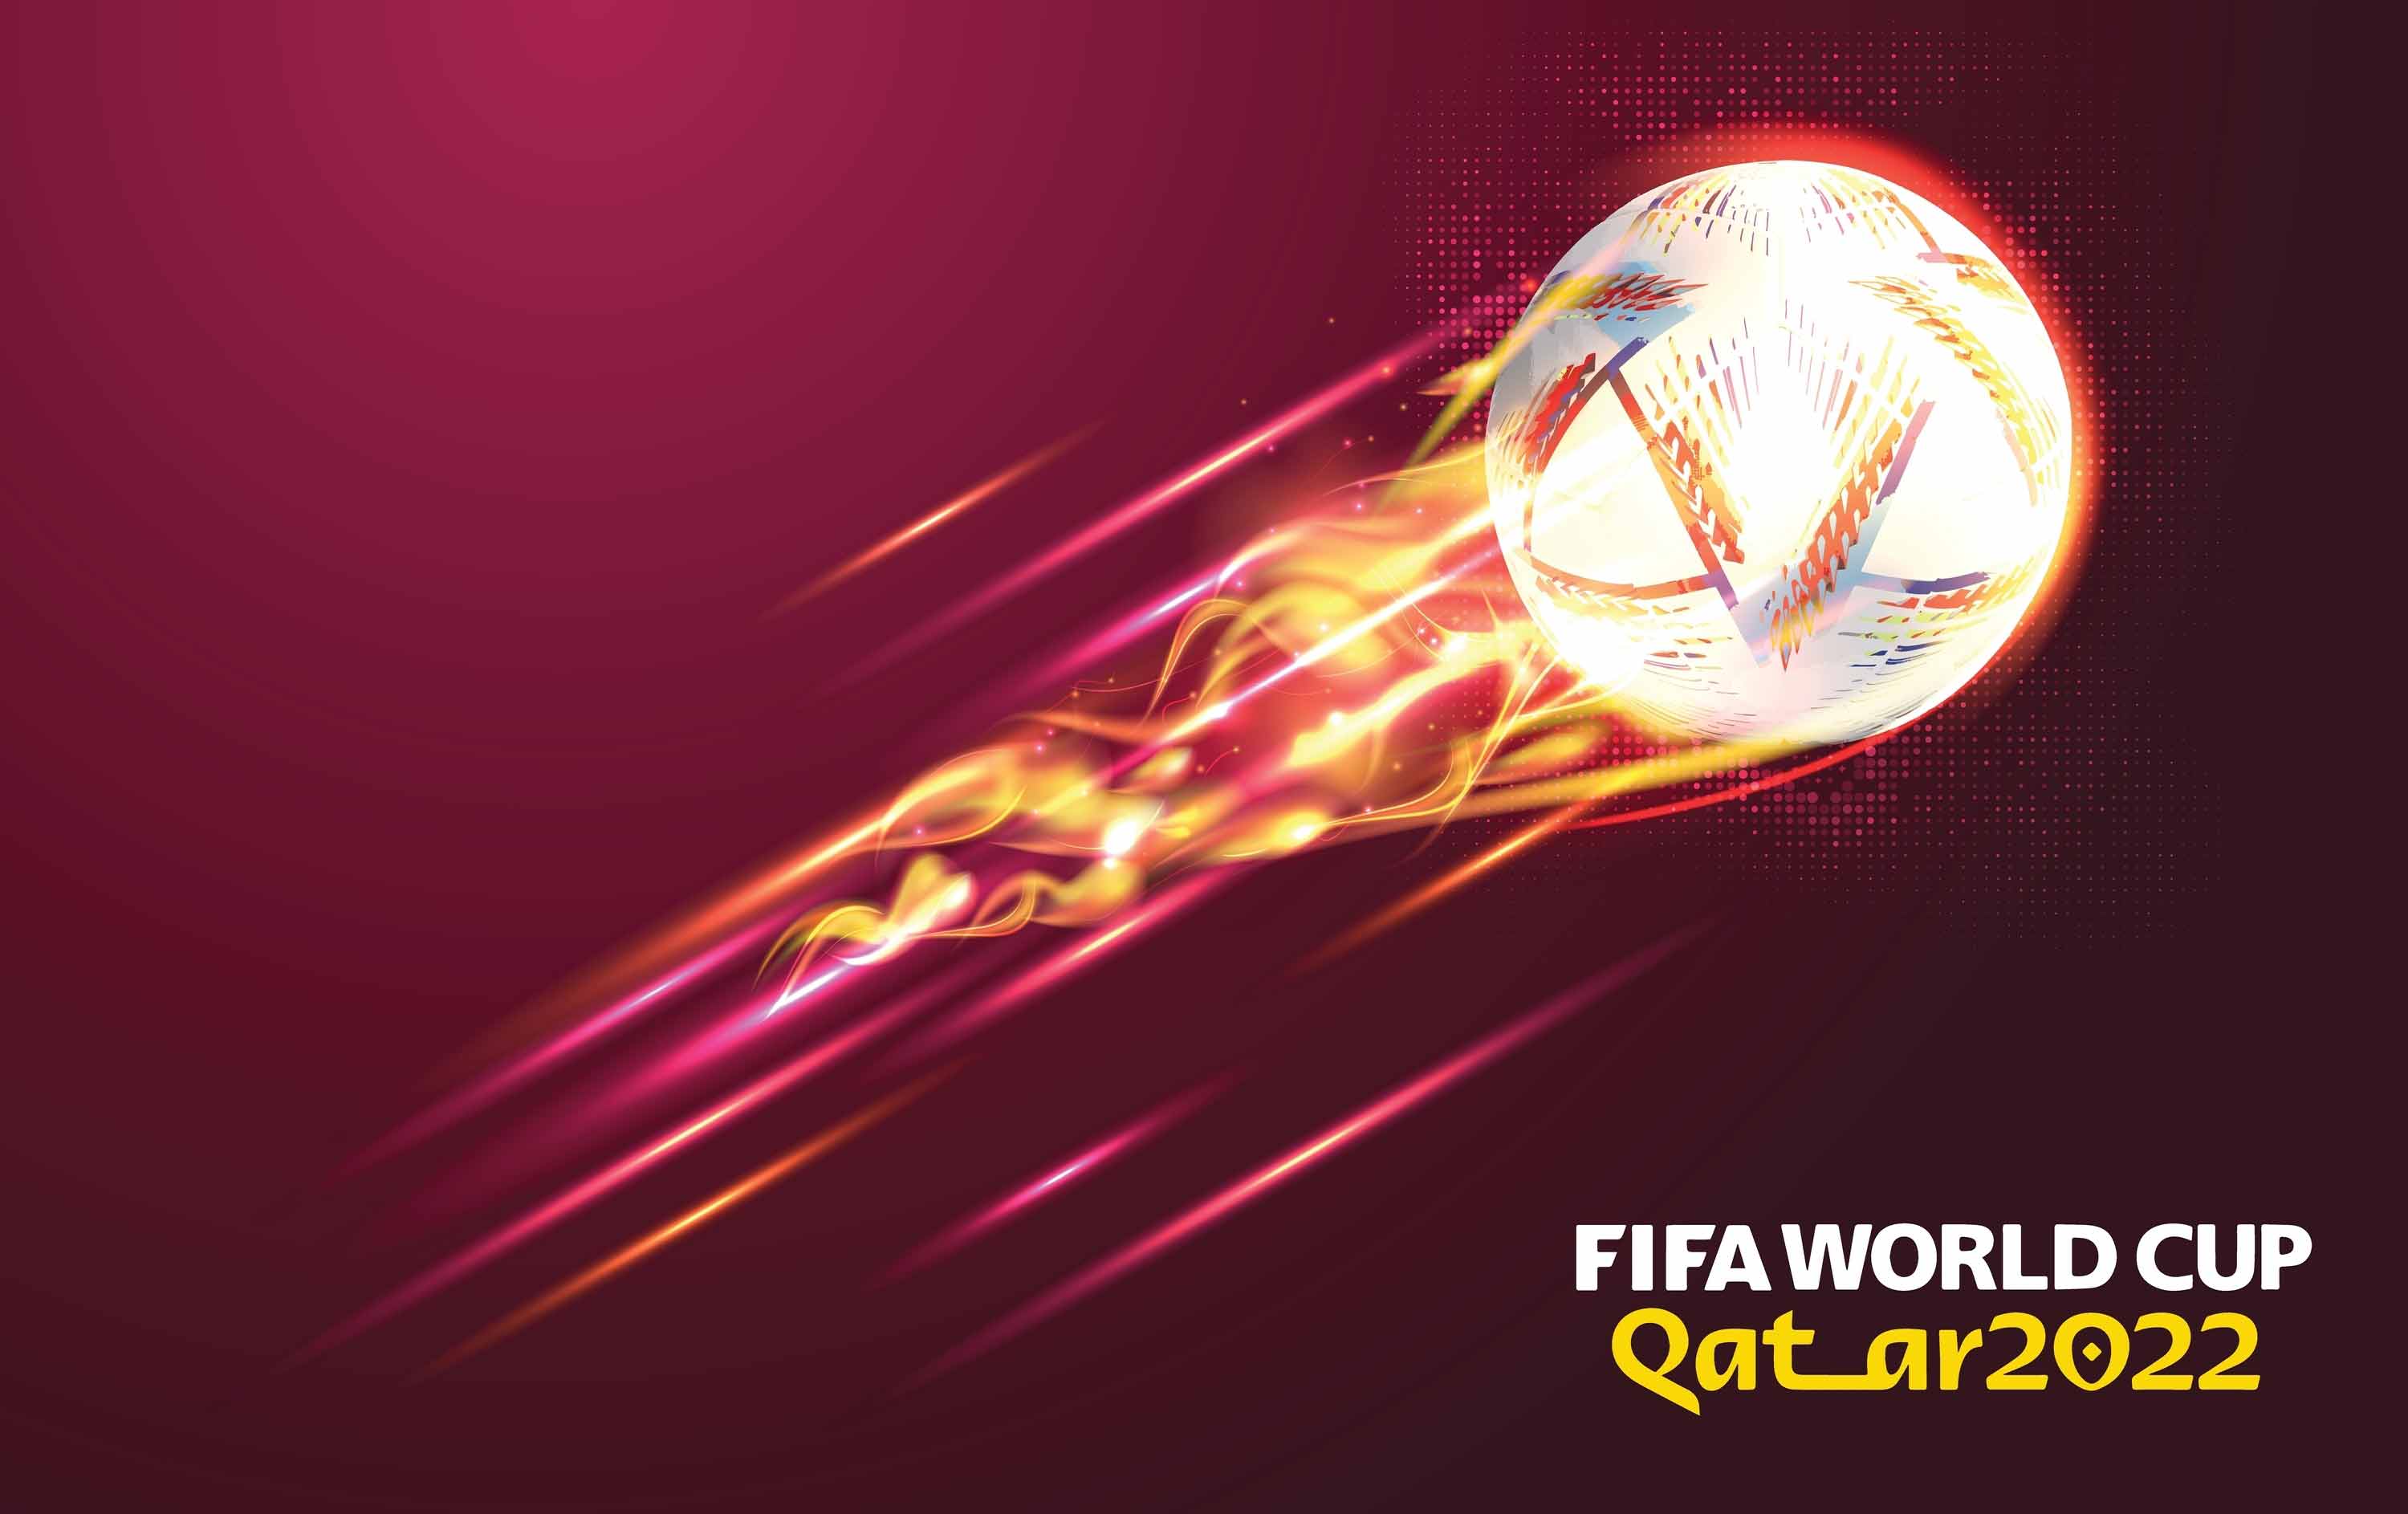 What Qatar Wants from the World Cup